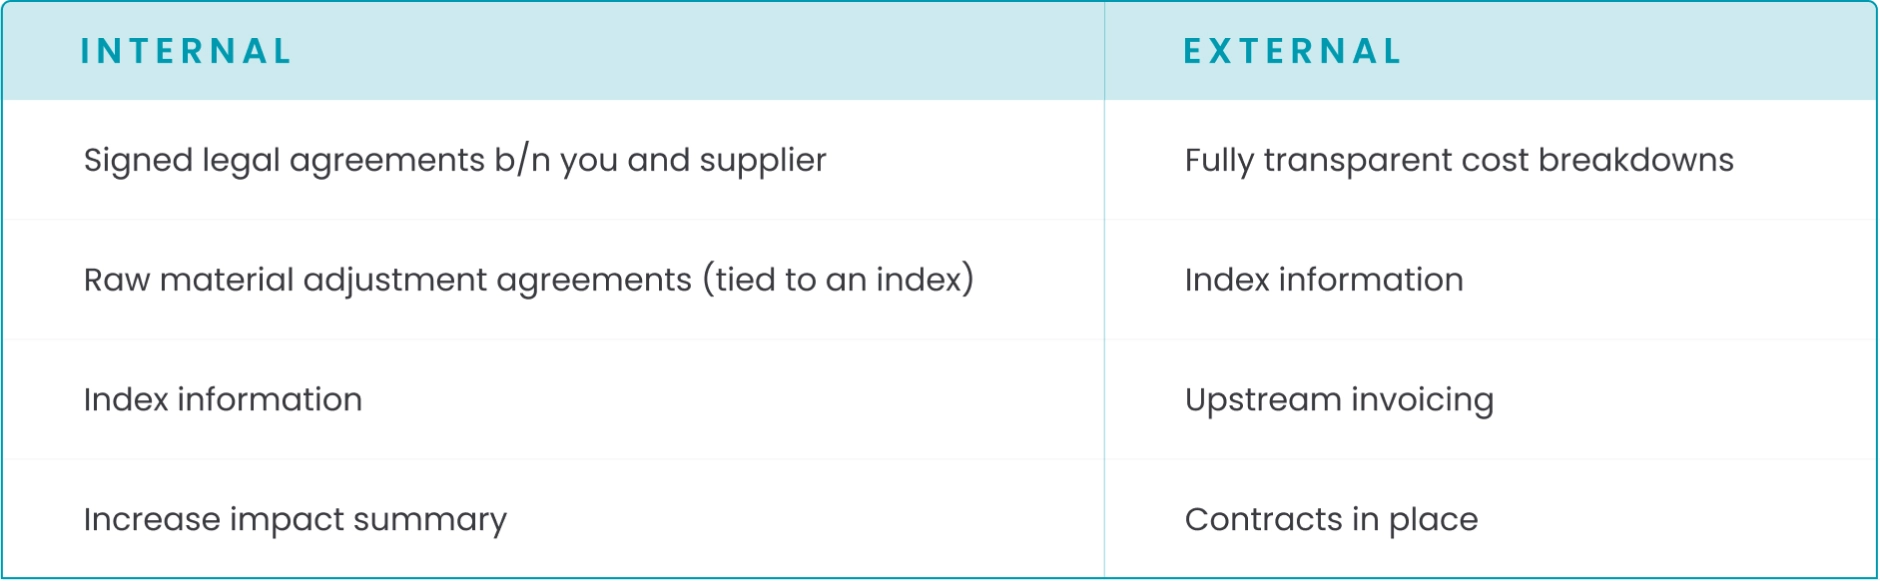 Managing Supplier Cost Increases in Inflationary Times